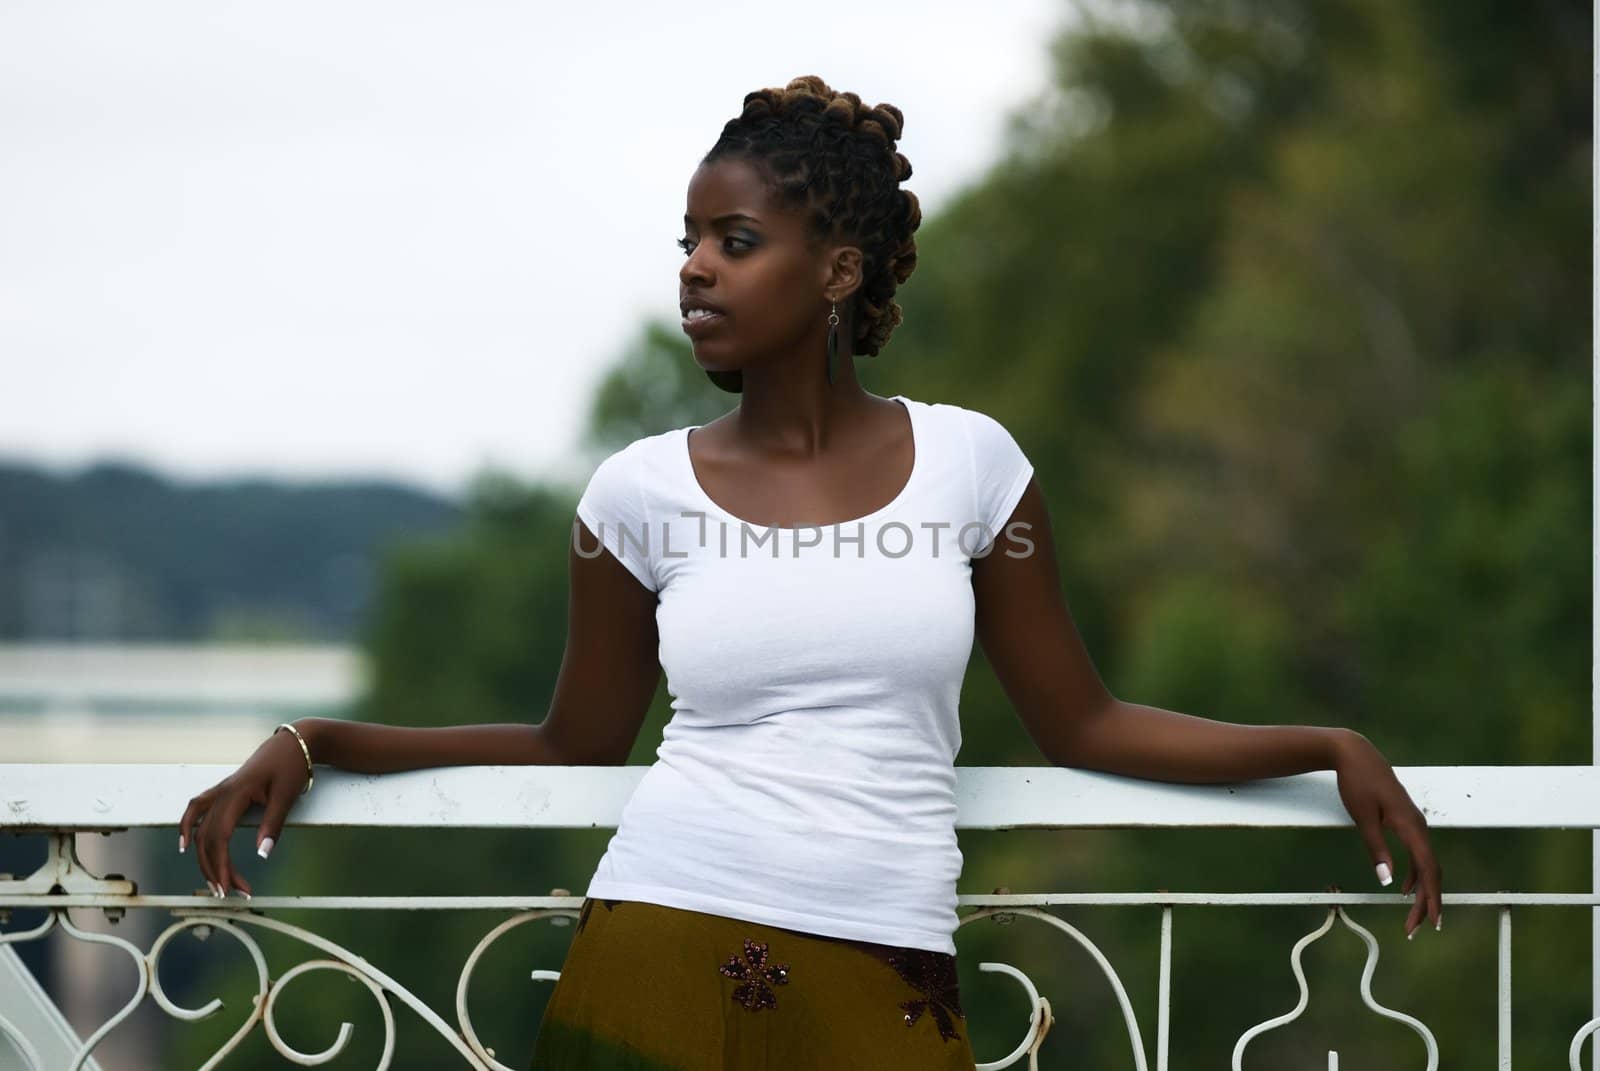 African American woman stands and relaxes on a bridge